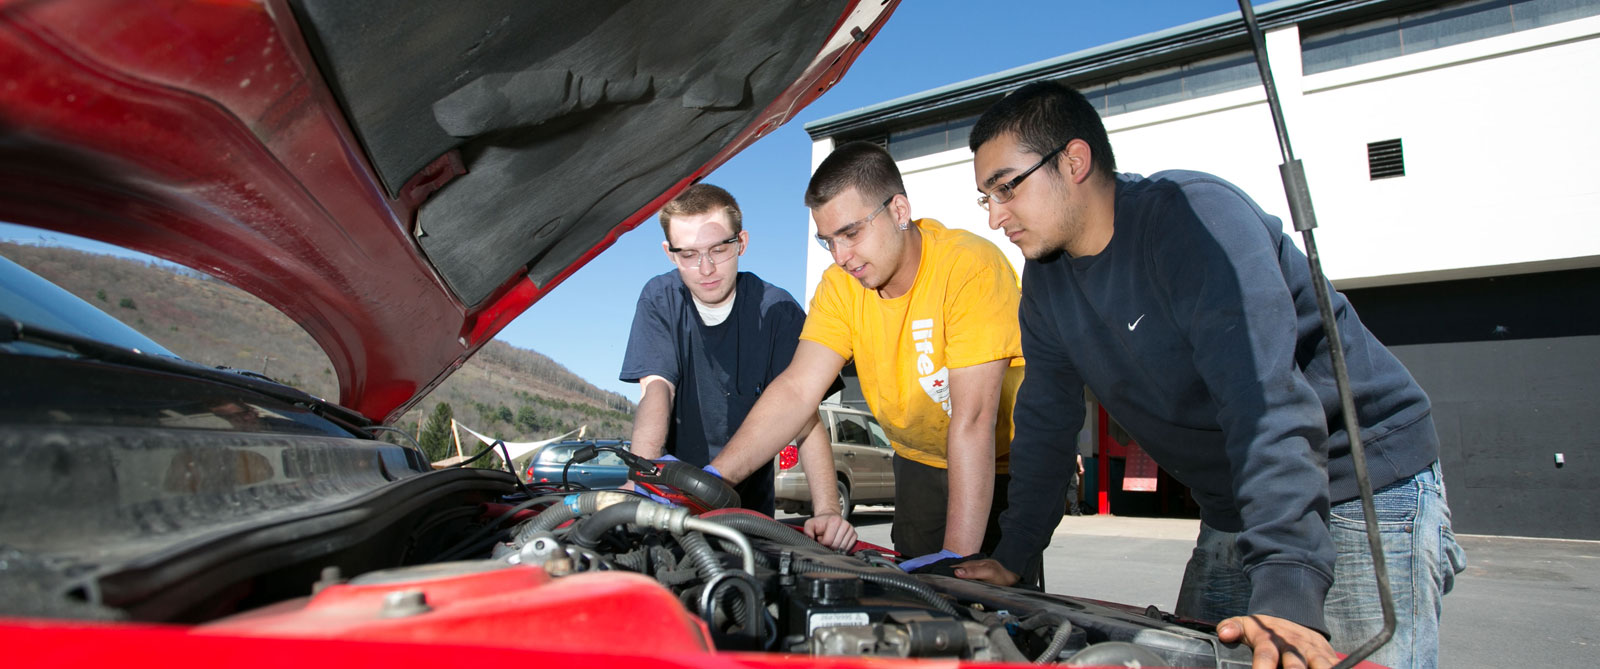 Three students working on a car engine